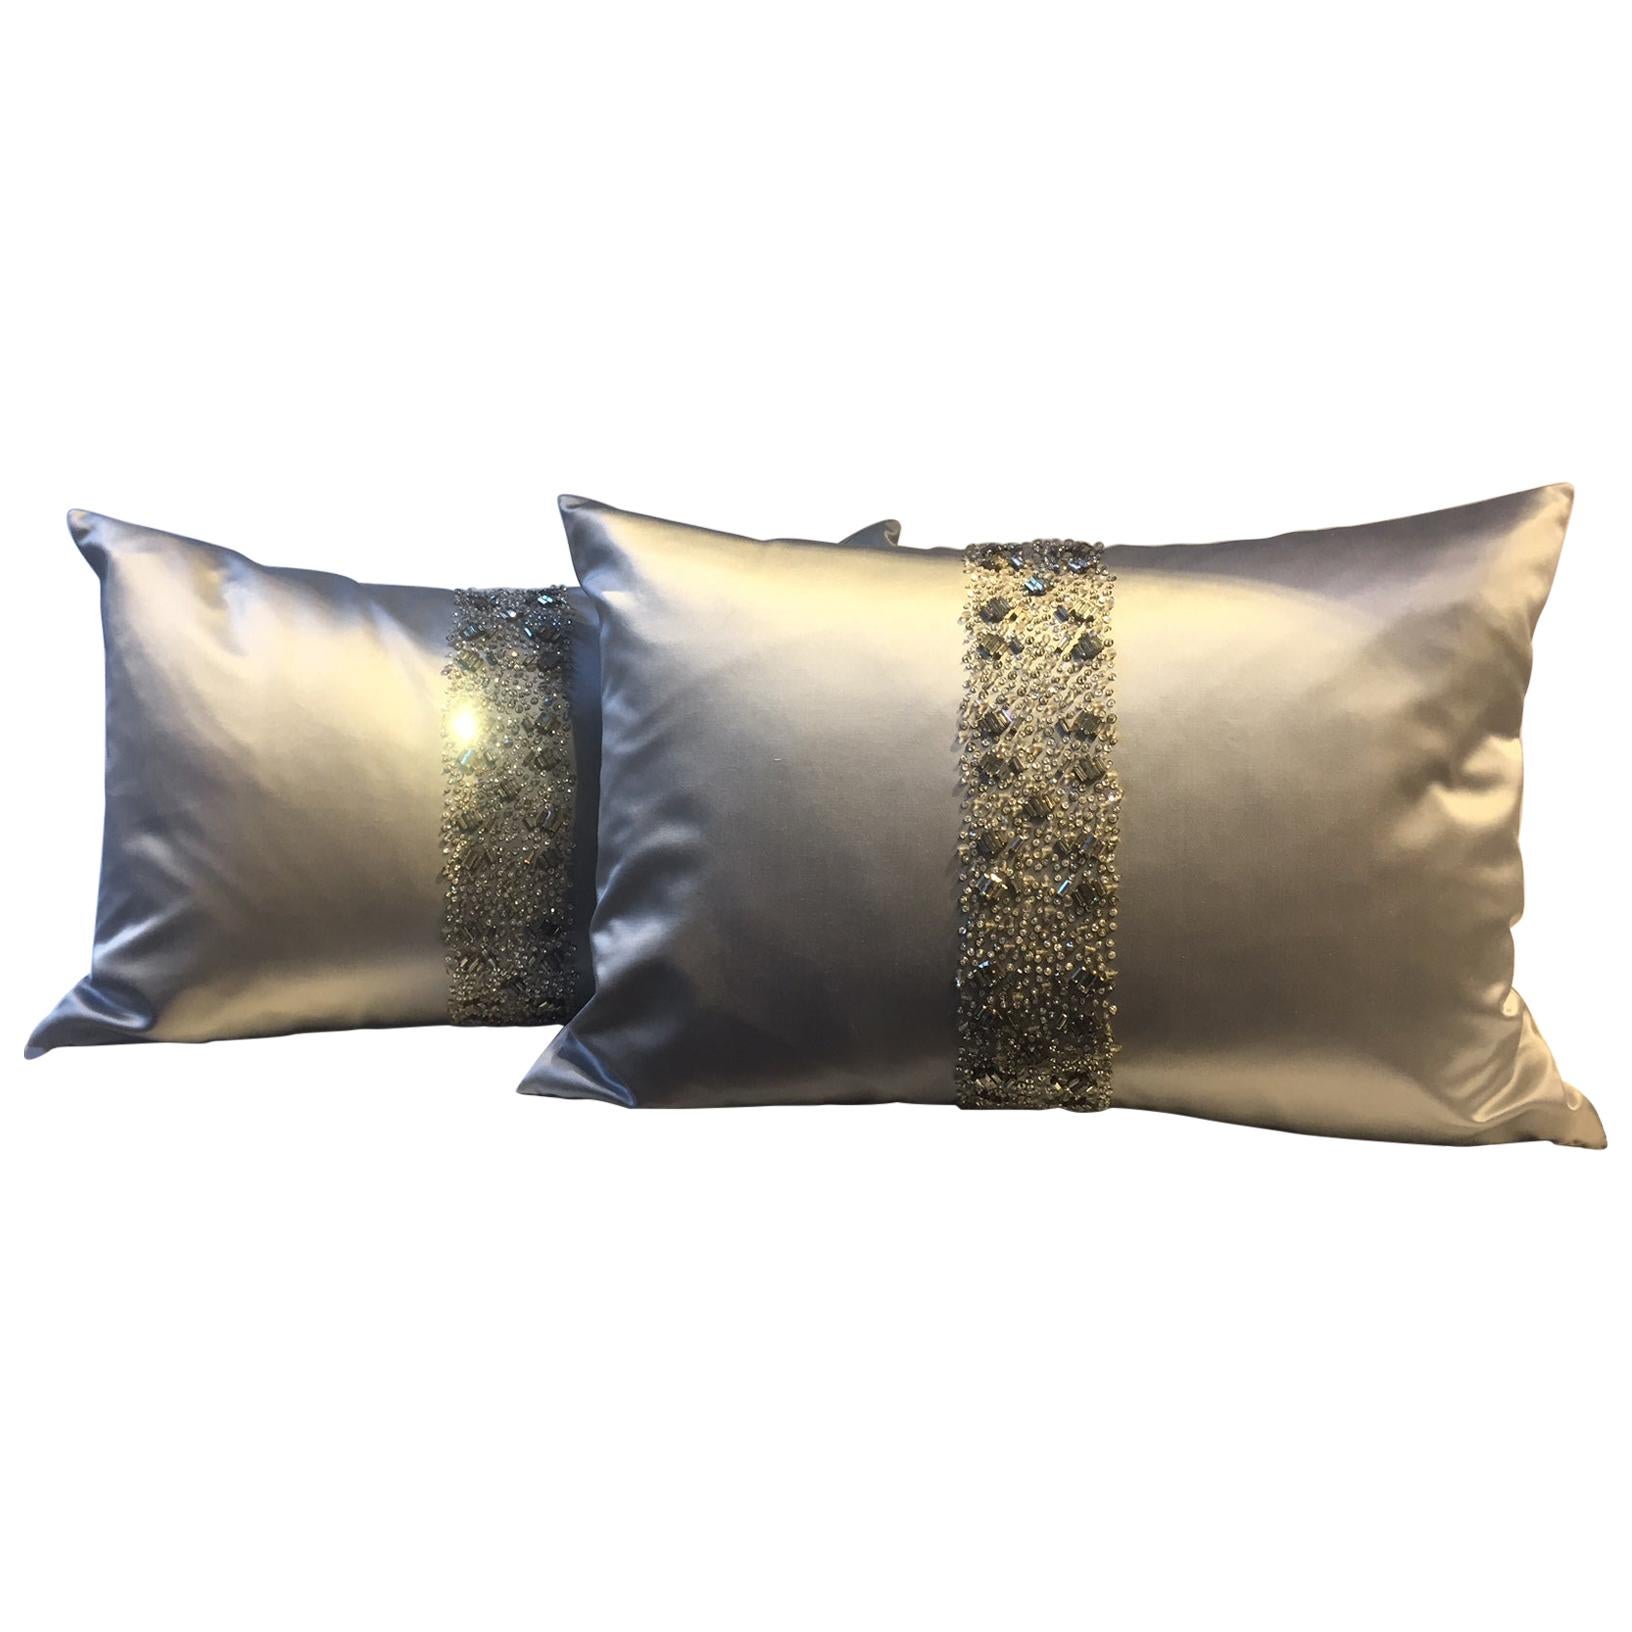 Ice Blue Silk Cushions Hand Embroidery with Band Detail in Swarovski Crystals For Sale